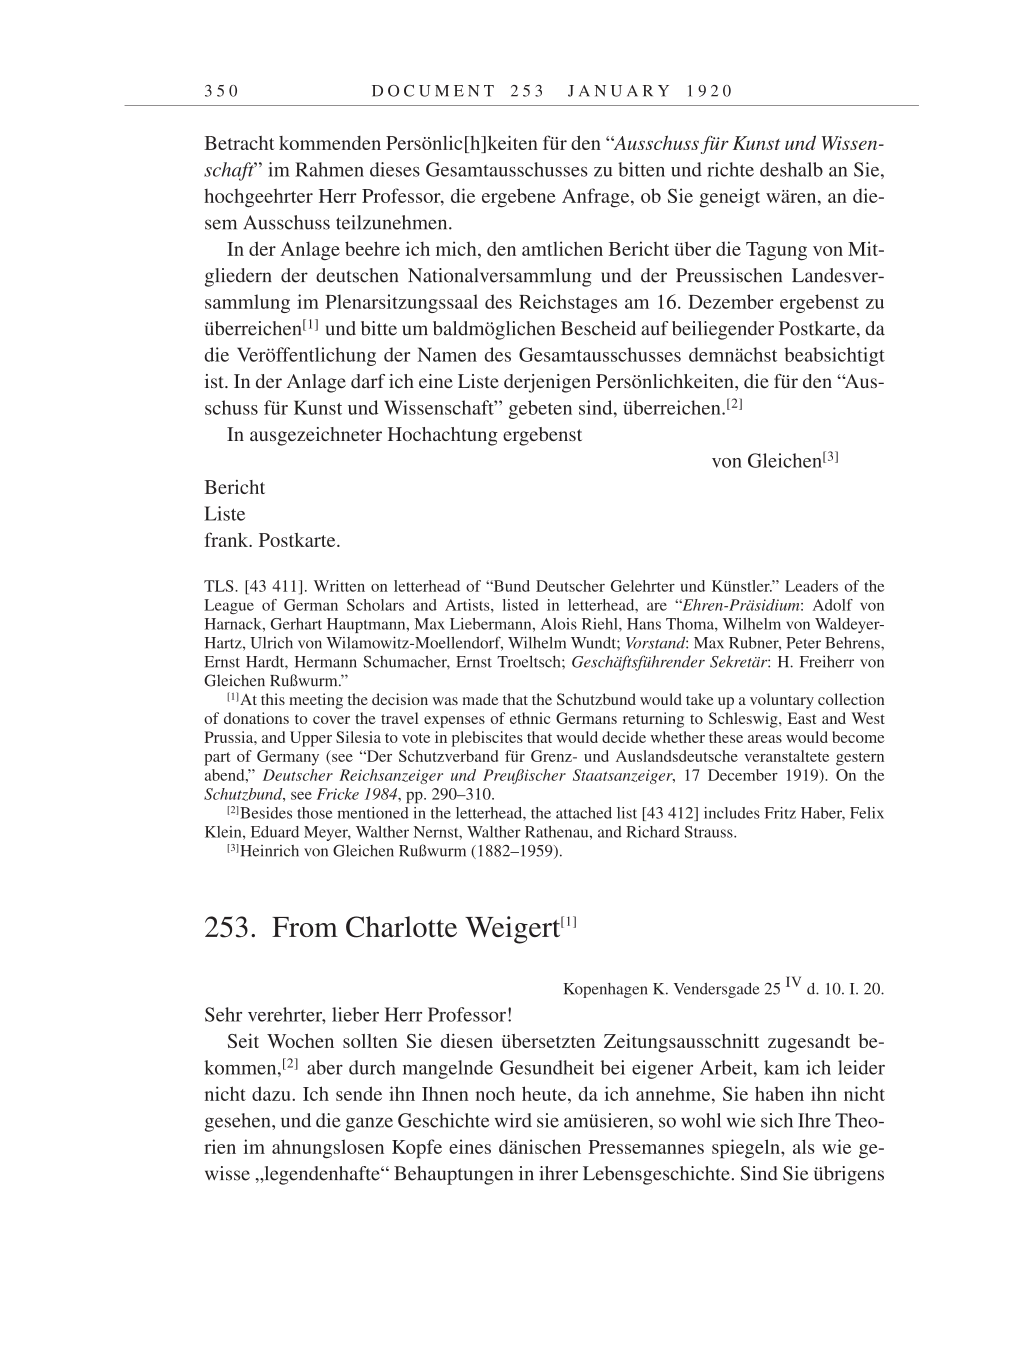 Volume 9: The Berlin Years: Correspondence January 1919-April 1920 page 350